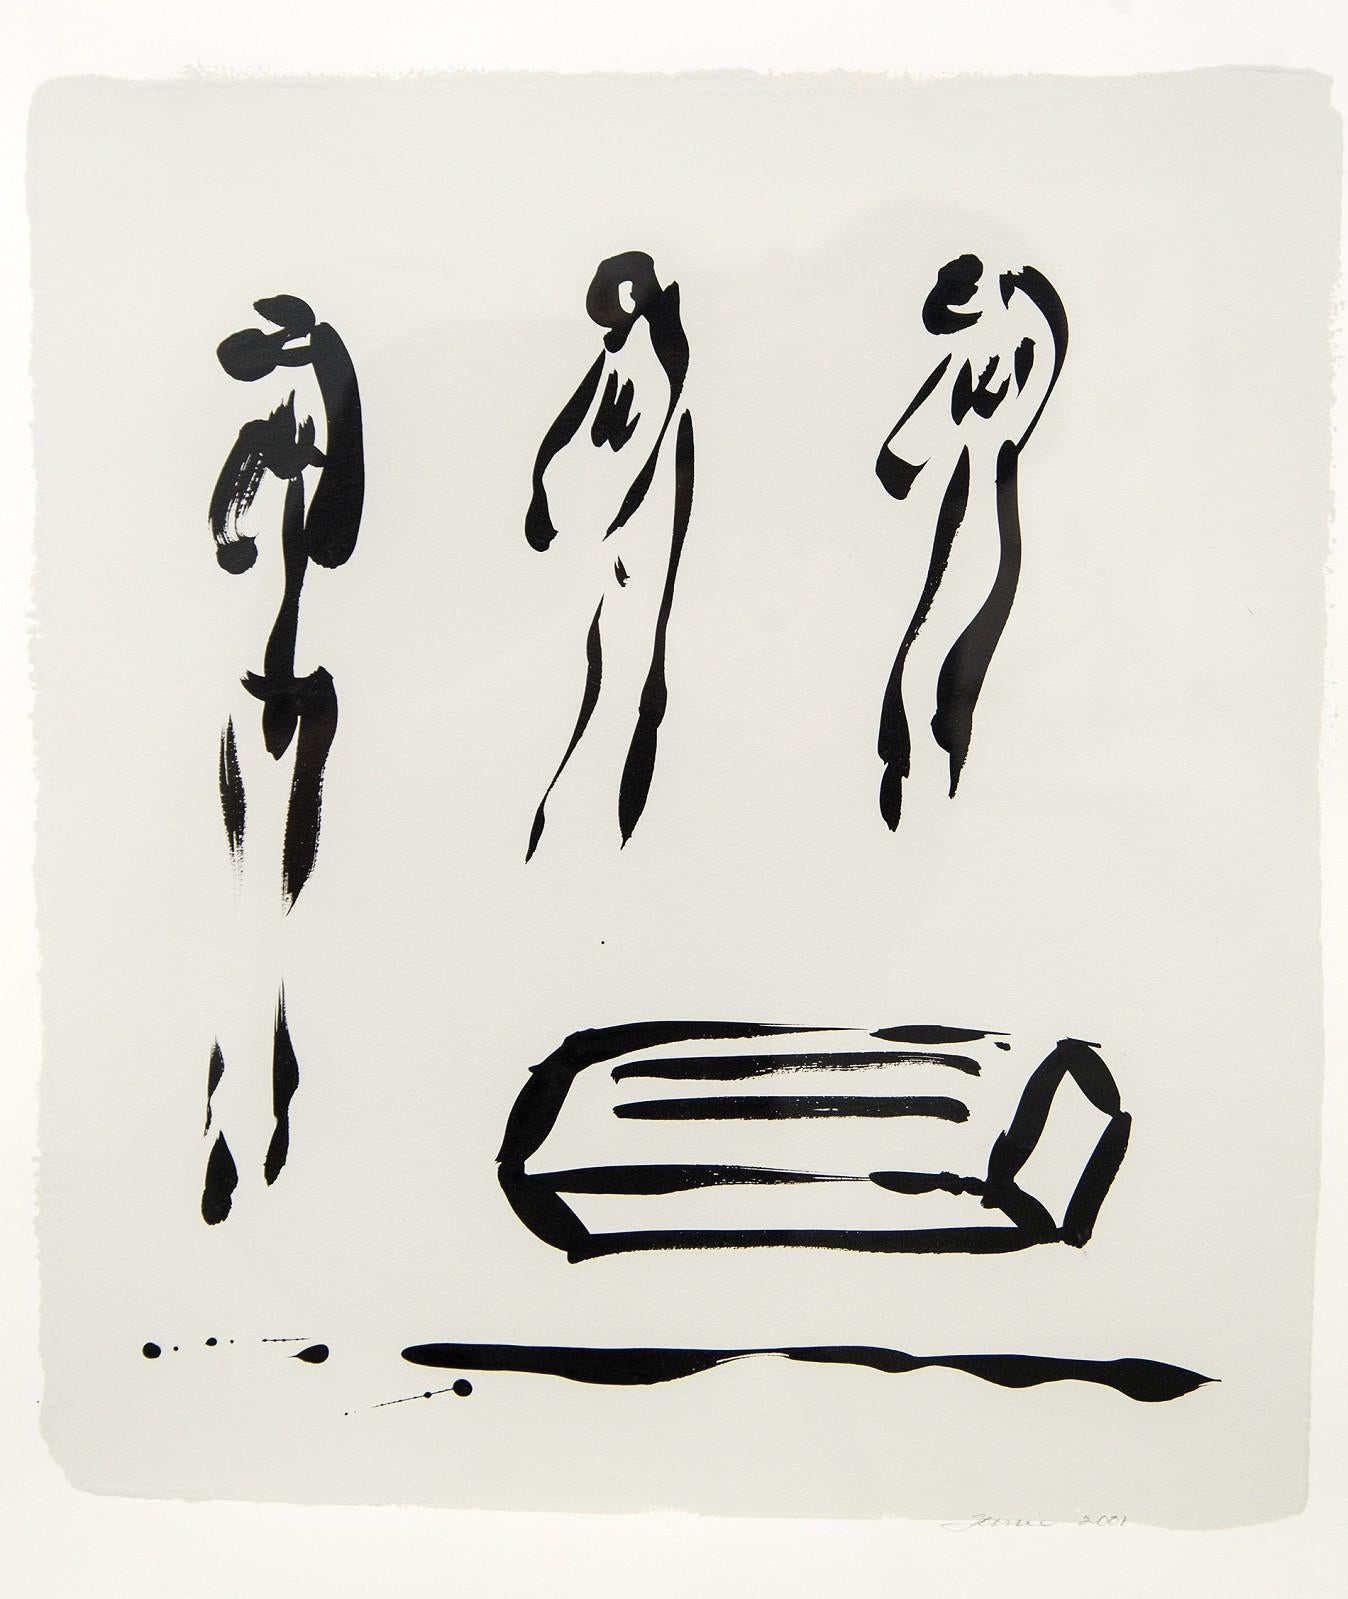 In this striking black ink on white drawing by Canadian artist Lynne Fernie, three standing figures appear to move across the canvas. Fernie’s abstract compositions explore the graceful gestures and energy of bodies and libidos—both human and